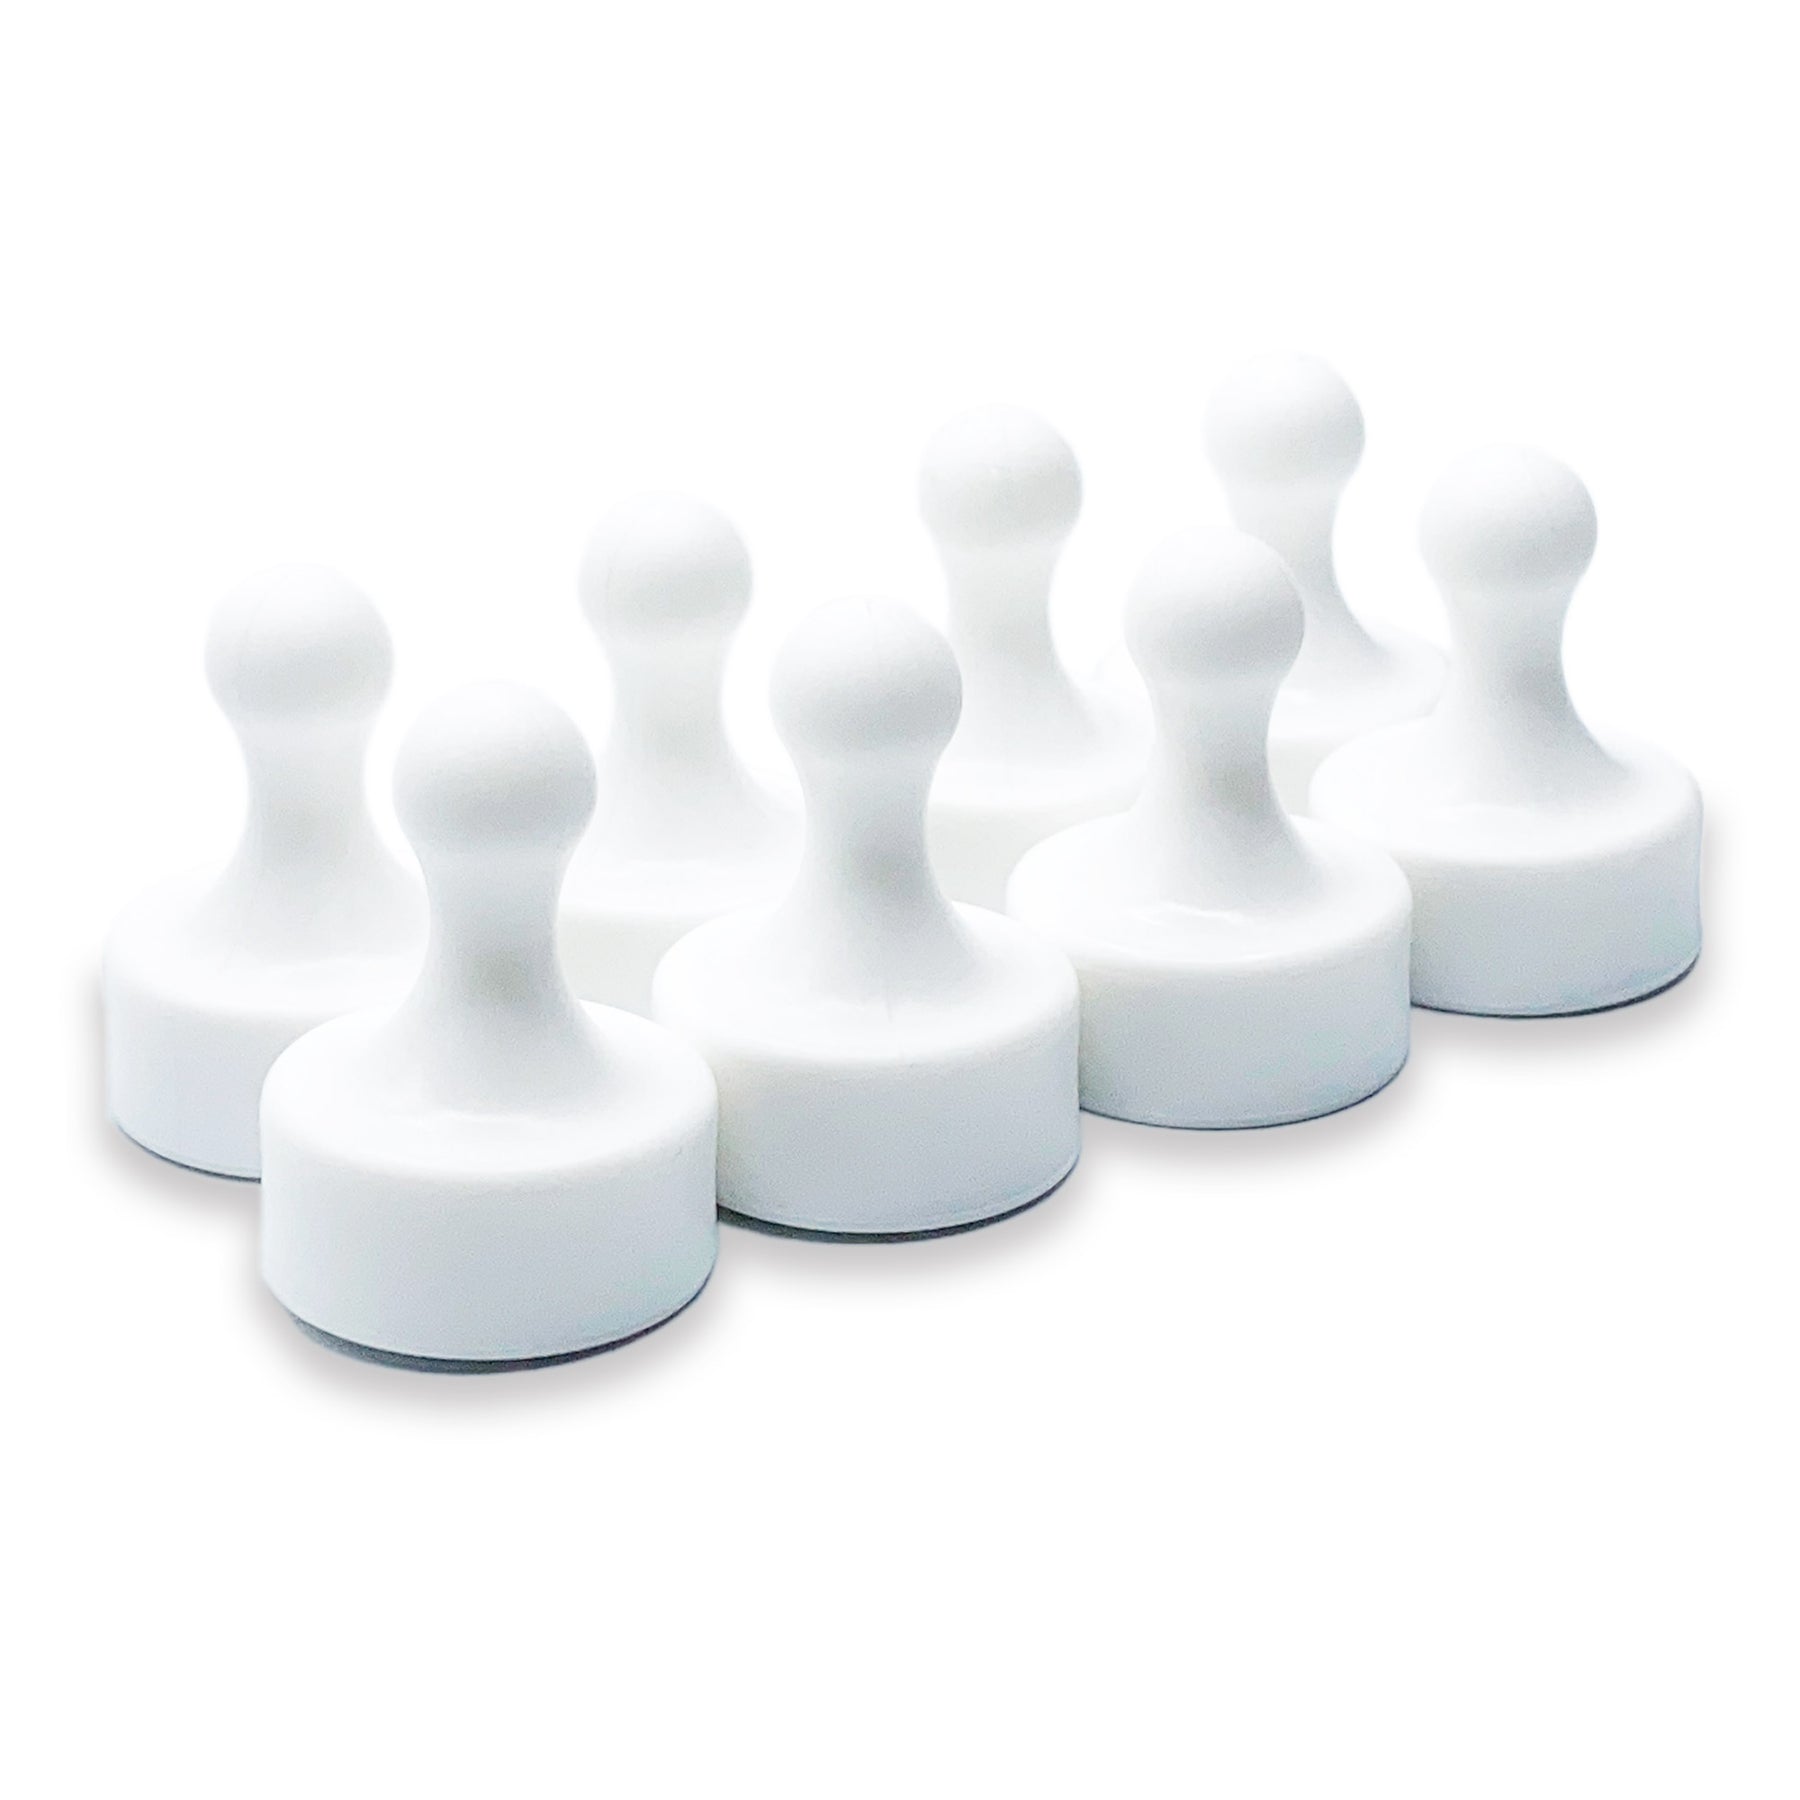 10pcs 21x26mmPush pin Office thumbtack Strong Neodymium Magnets Cones  magnets pinboard Chess Magnetic push pins white board map